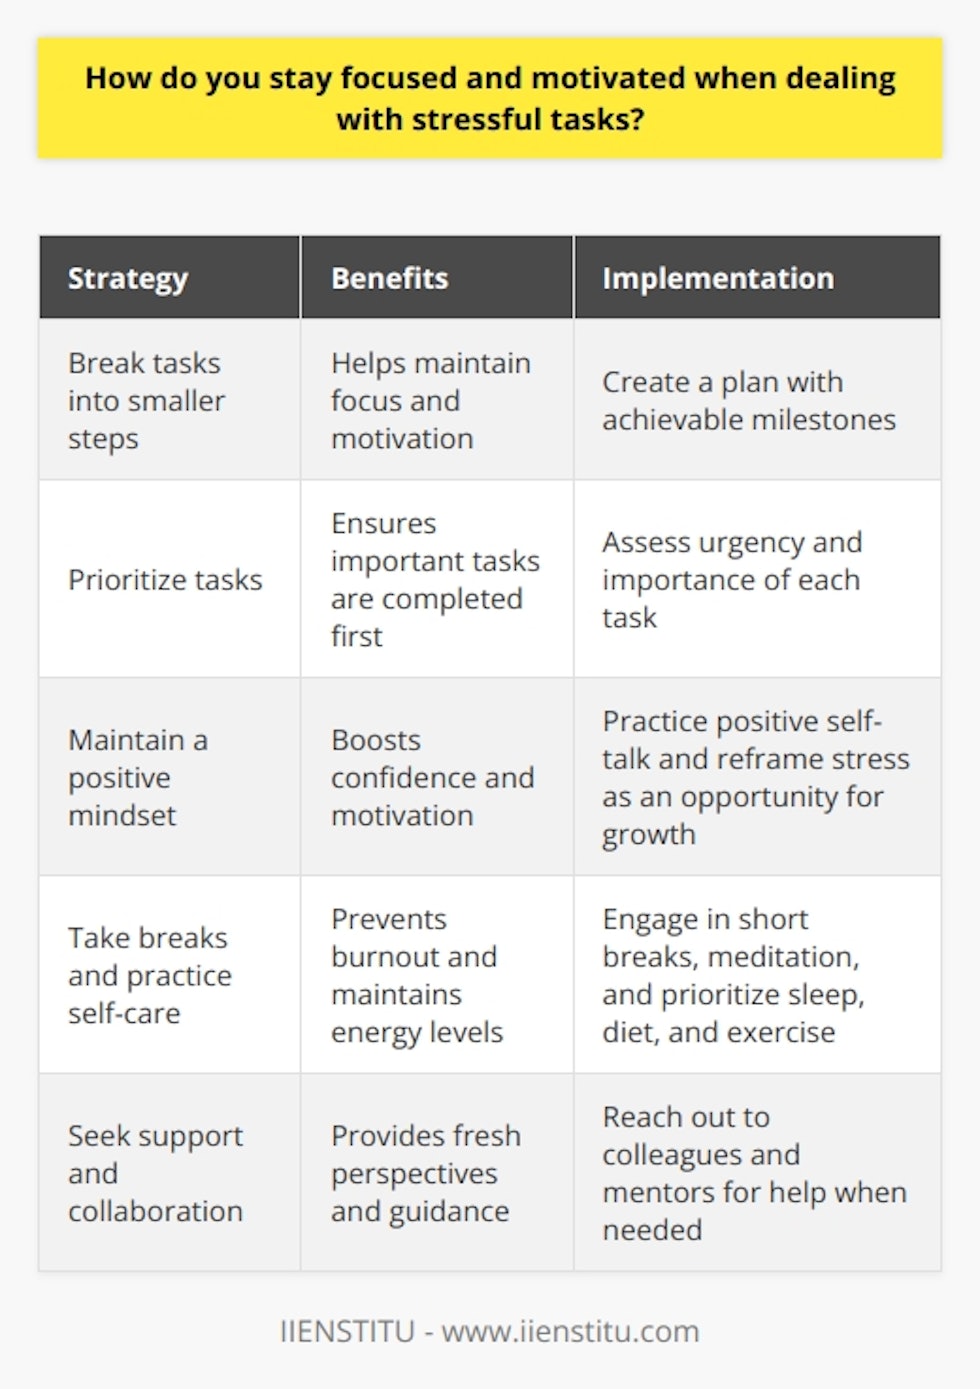 When dealing with stressful tasks, I find it essential to break them down into smaller, manageable steps. This approach helps me stay focused and motivated, as I can see tangible progress along the way. Prioritizing and Planning I always start by prioritizing my tasks based on their urgency and importance. Once I have a clear understanding of what needs to be done, I create a realistic plan with achievable milestones. This roadmap keeps me on track and allows me to stay organized even under pressure. Maintaining a Positive Mindset Whenever I feel overwhelmed, I remind myself of my past successes and the challenges Ive overcome. This positive self-talk boosts my confidence and motivation, enabling me to tackle stressful situations with a can-do attitude. I also try to reframe stress as an opportunity for growth and learning, which helps me approach tasks with enthusiasm rather than dread. Taking Breaks and Practicing Self-Care I believe in the power of taking short breaks to recharge and refocus. When I feel my concentration slipping, I step away from my work for a few minutes to stretch, practice deep breathing, or engage in a quick meditation session. These mini-breaks help me maintain my energy levels and prevent burnout. Additionally, I prioritize self-care by getting enough sleep, eating well, and exercising regularly, which all contribute to my overall resilience and ability to handle stress. Seeking Support and Collaboration Im not afraid to reach out for help when needed. Collaborating with colleagues or seeking guidance from mentors can provide fresh perspectives and help me navigate challenging situations more effectively. By fostering a supportive network, I feel more equipped to handle stressful tasks and stay motivated even in the face of adversity.